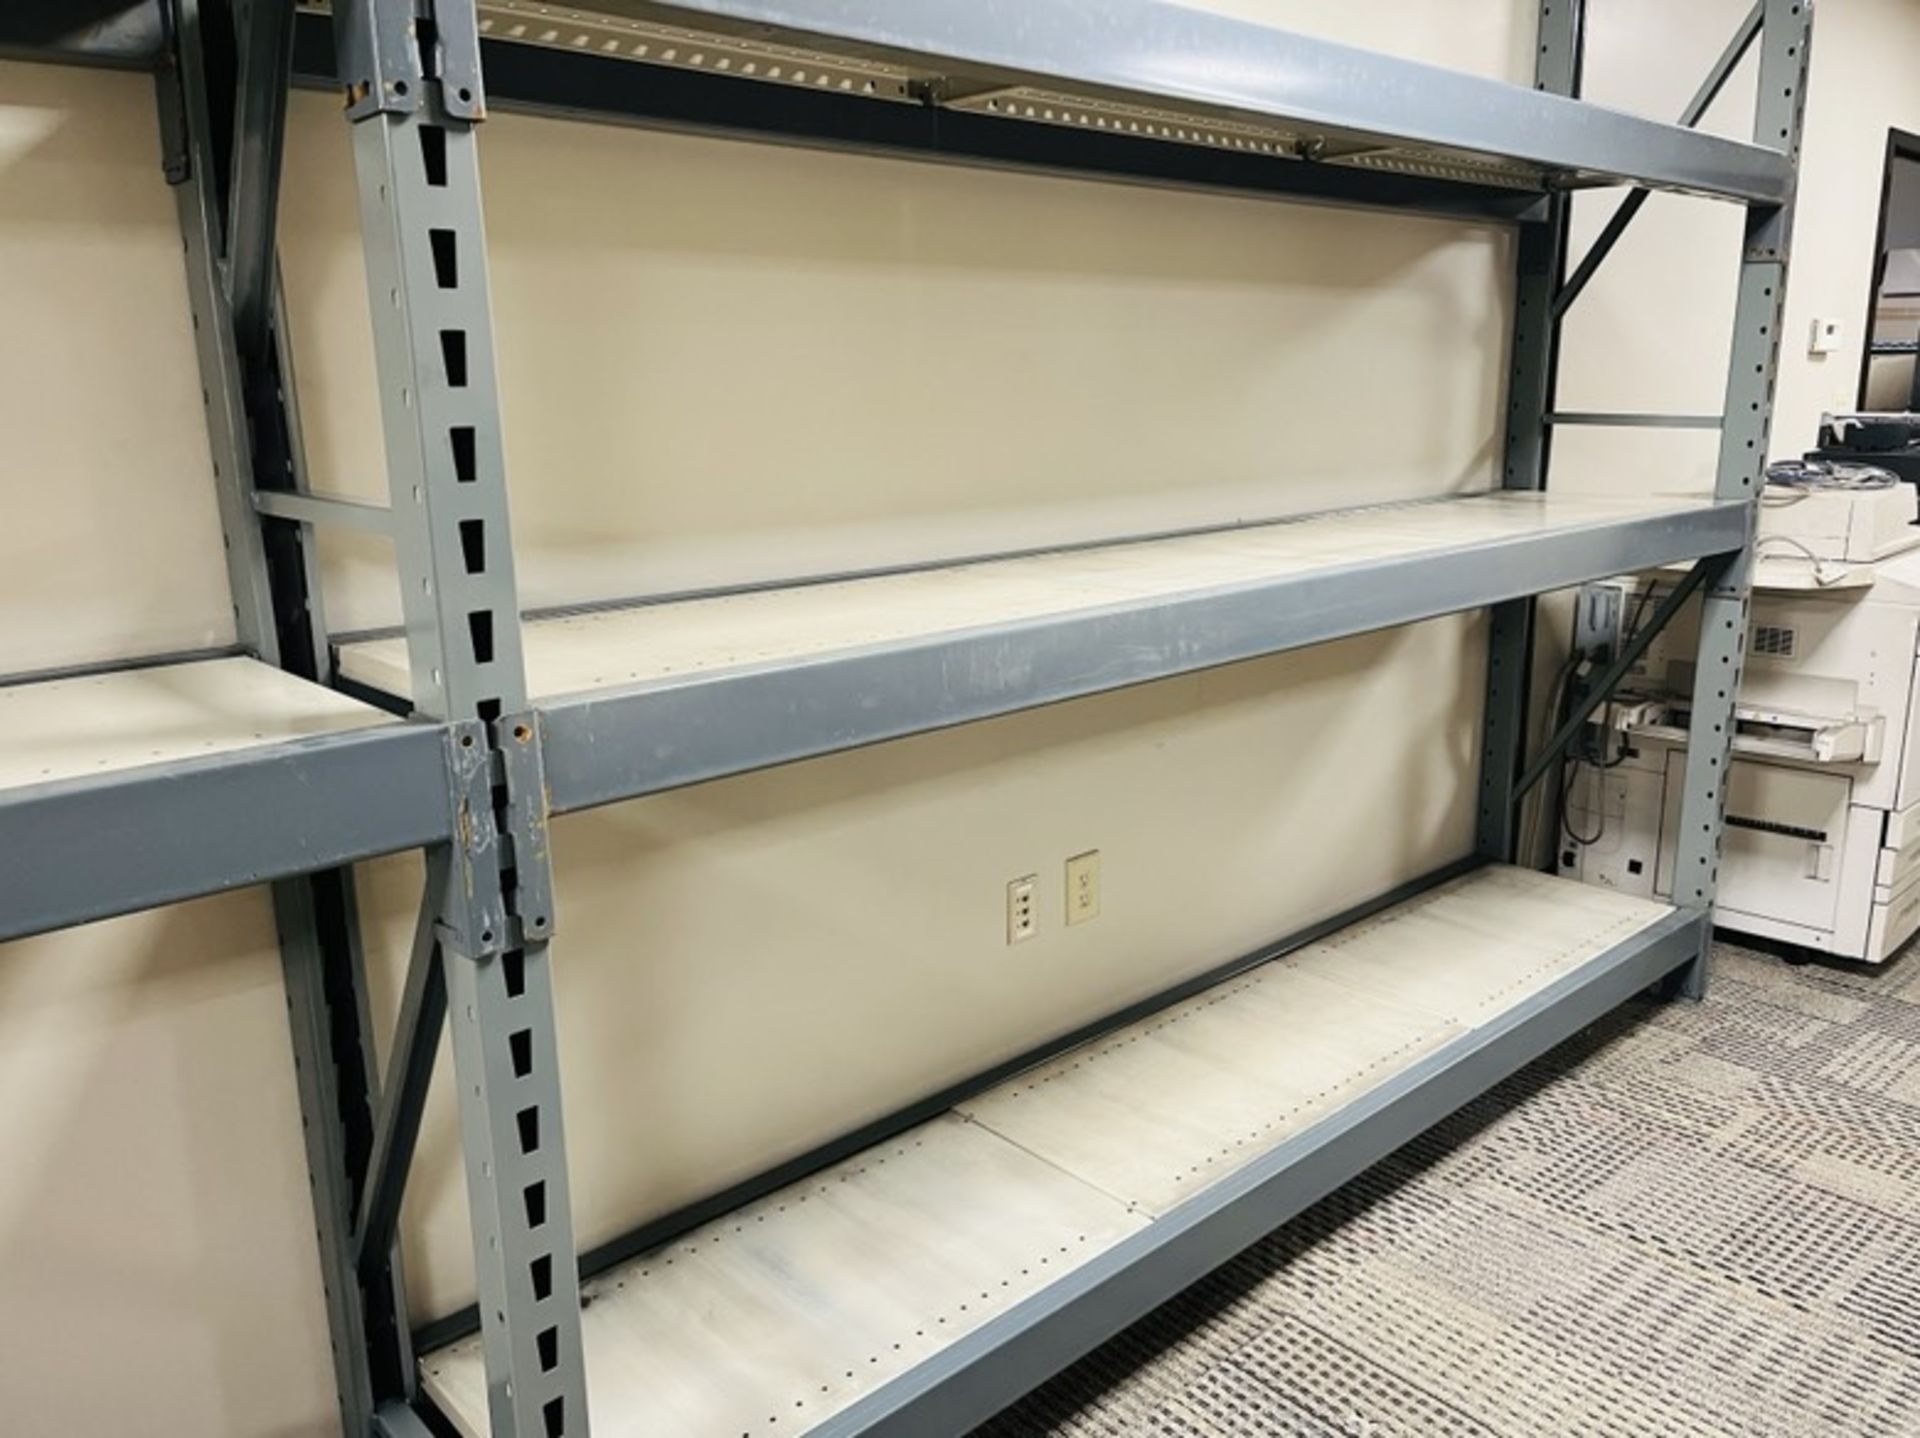 5 SECTION OF RETAIL/MERCHANDISE PALLET RACK SHELVING 8'H X 21.5"D X 108"L WITH 3 SHELVES - Image 4 of 4